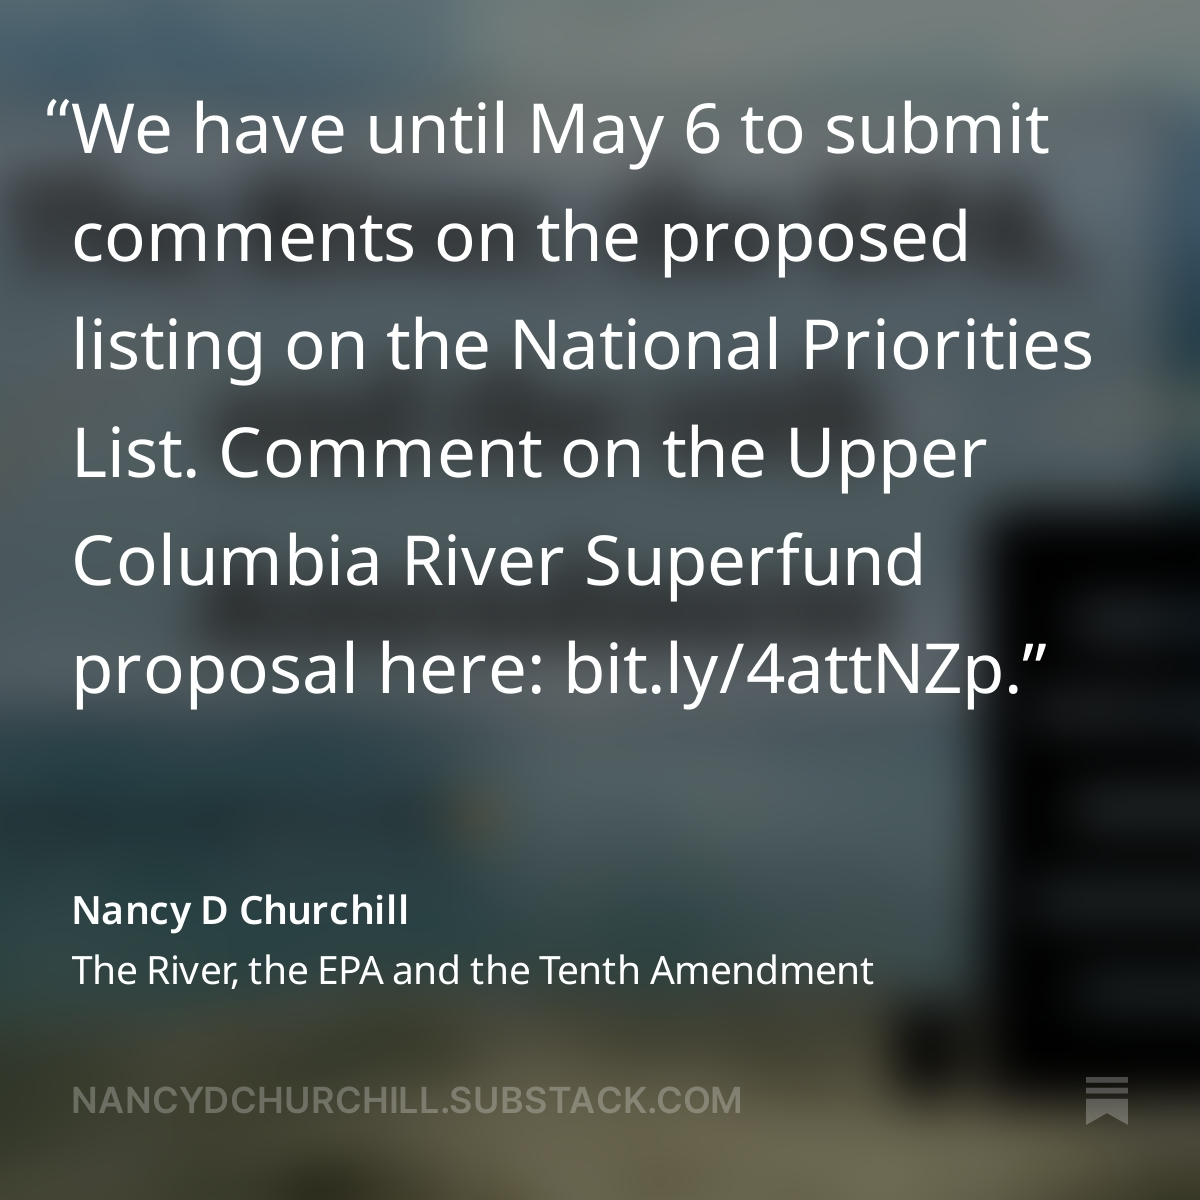 Have you commented yet on this EPA Superfund Proposal? 
#EPA #Superfund #UpperColumbiaRiver